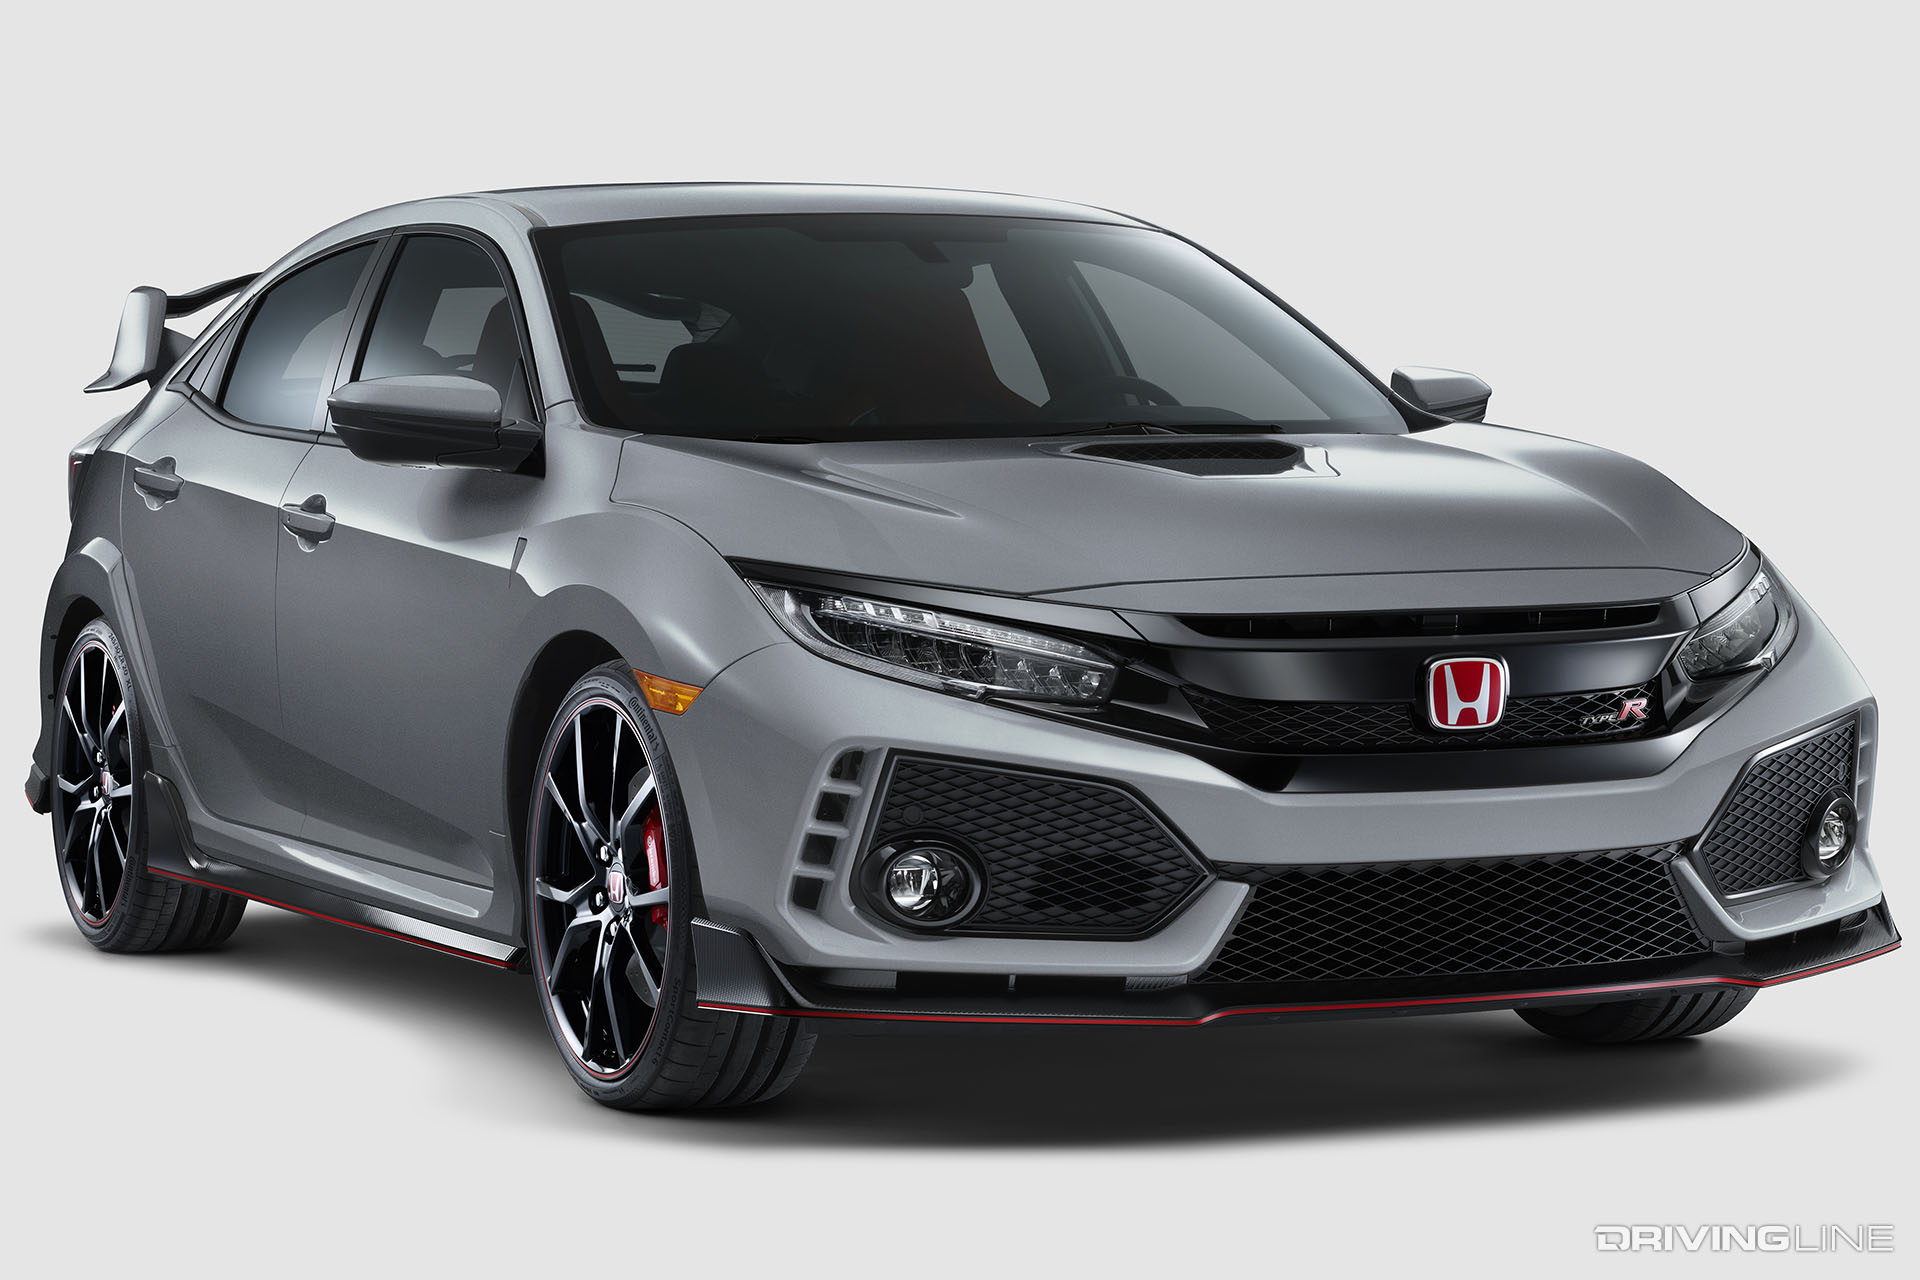 Honda Civic Si, SI and Type R models, Performance-driven cars, Exciting lineup, 1920x1280 HD Desktop